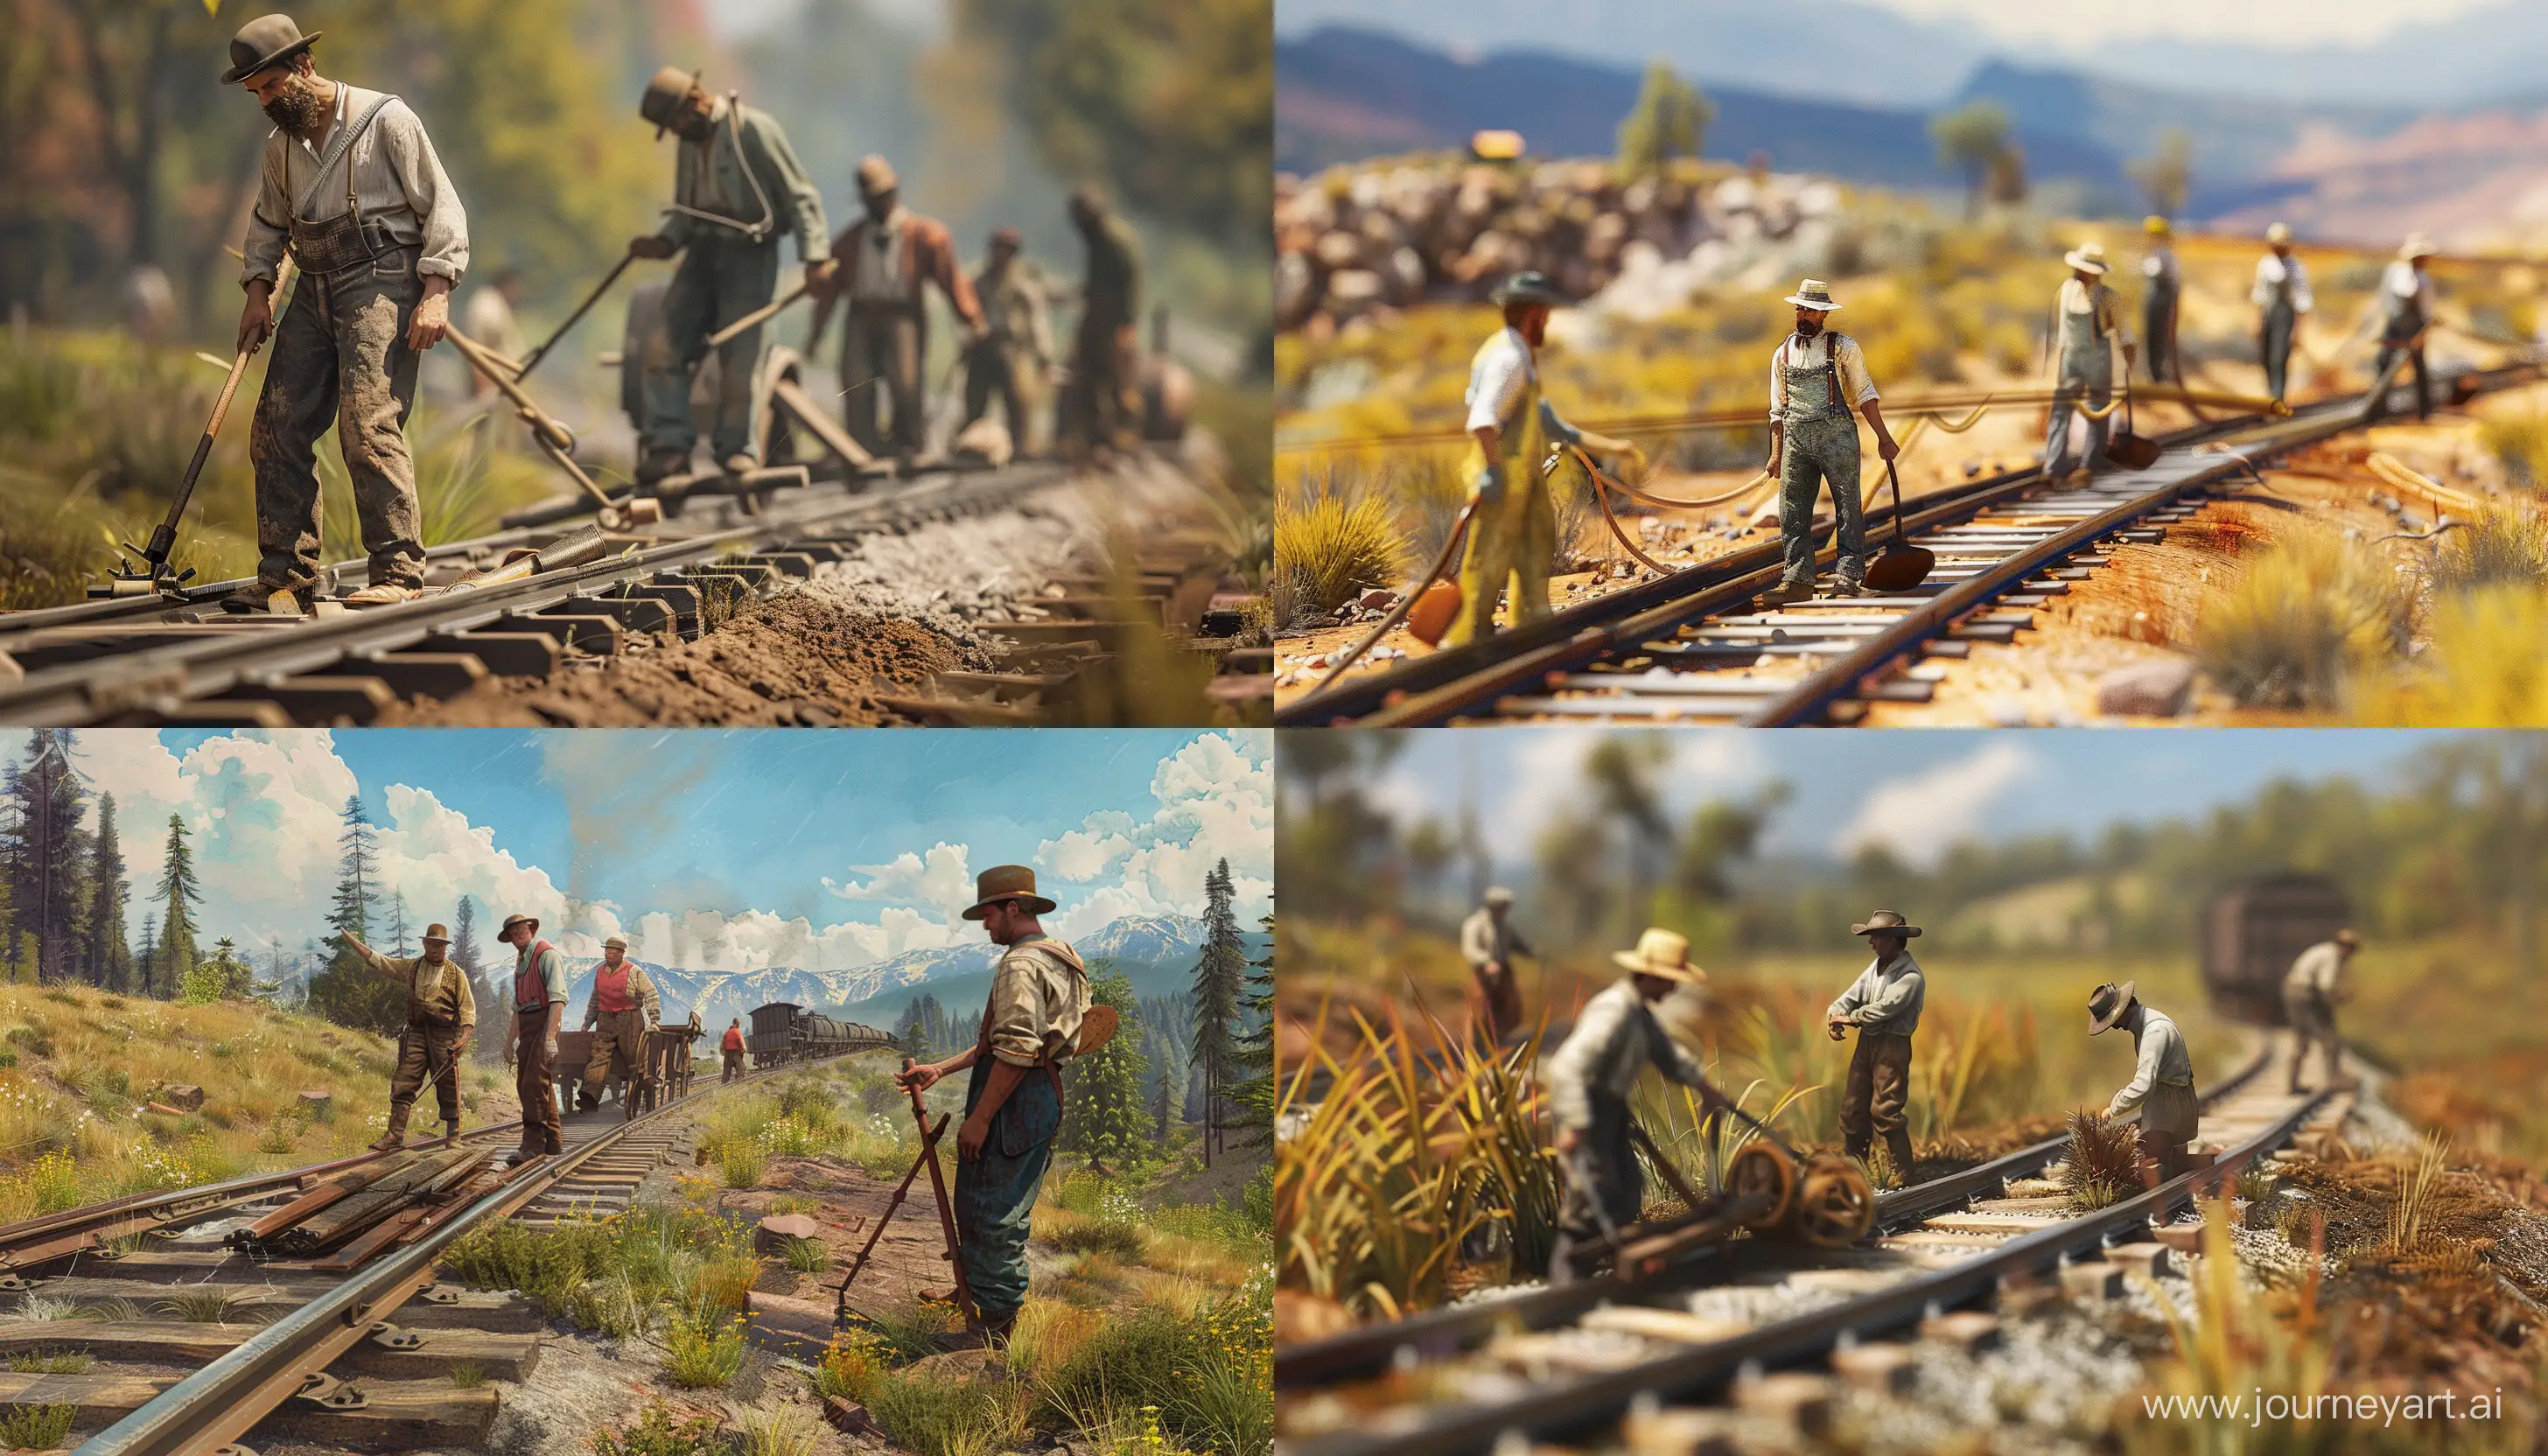 Railway workers in 1850 doing their daily work on the railway in normal and natural landscape American frontier conditions, with realistic and precise details in a beautiful and harmonious image with professional effects, background blur, precise details and creativity. highly detailed  --style raw --ar 7:4